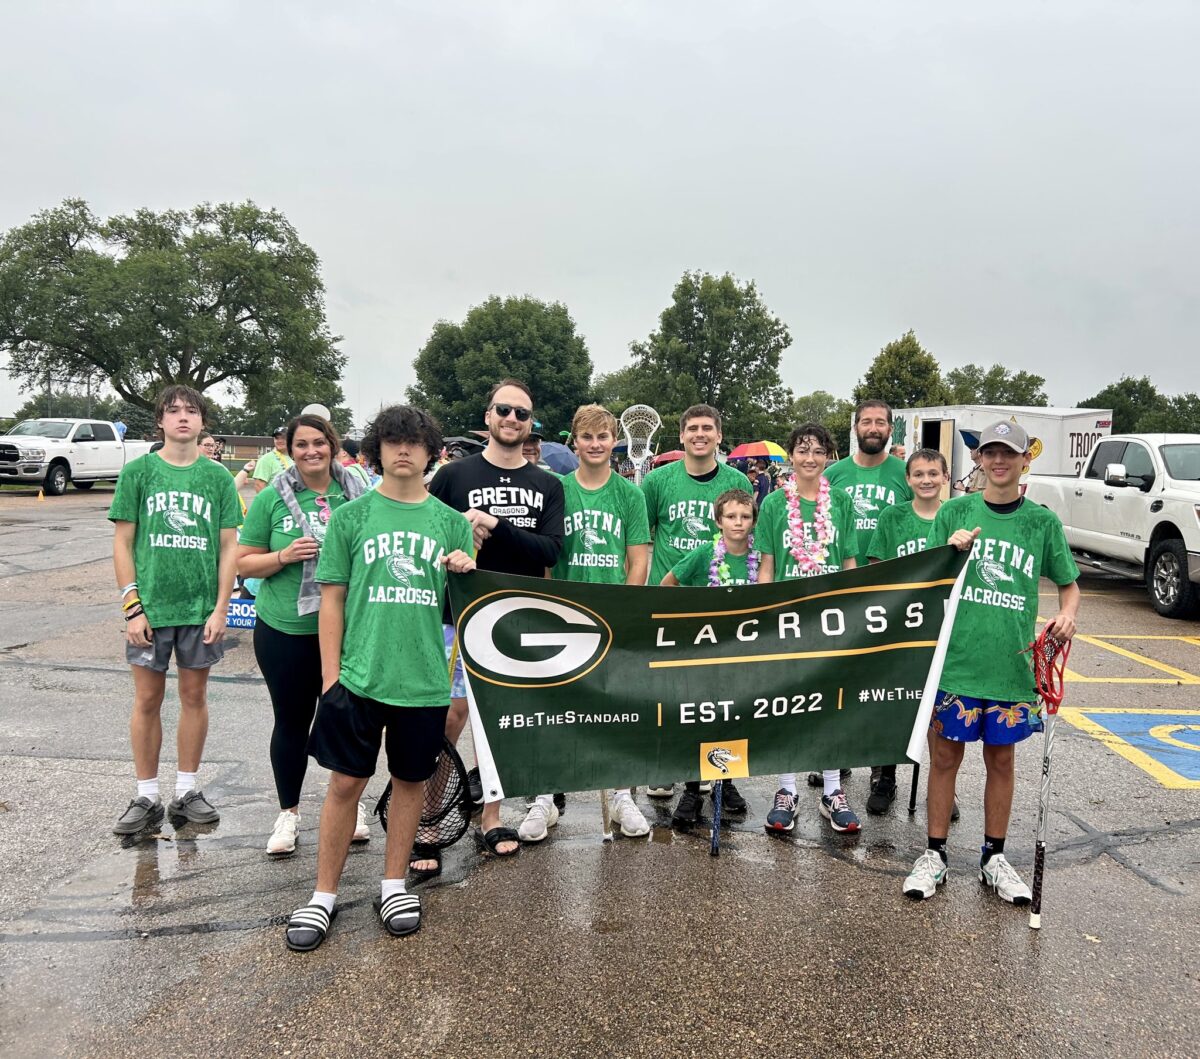 The Gretna Lacrosse team poses for a photo after the Gretna Days Parade on Saturday, July 29th.